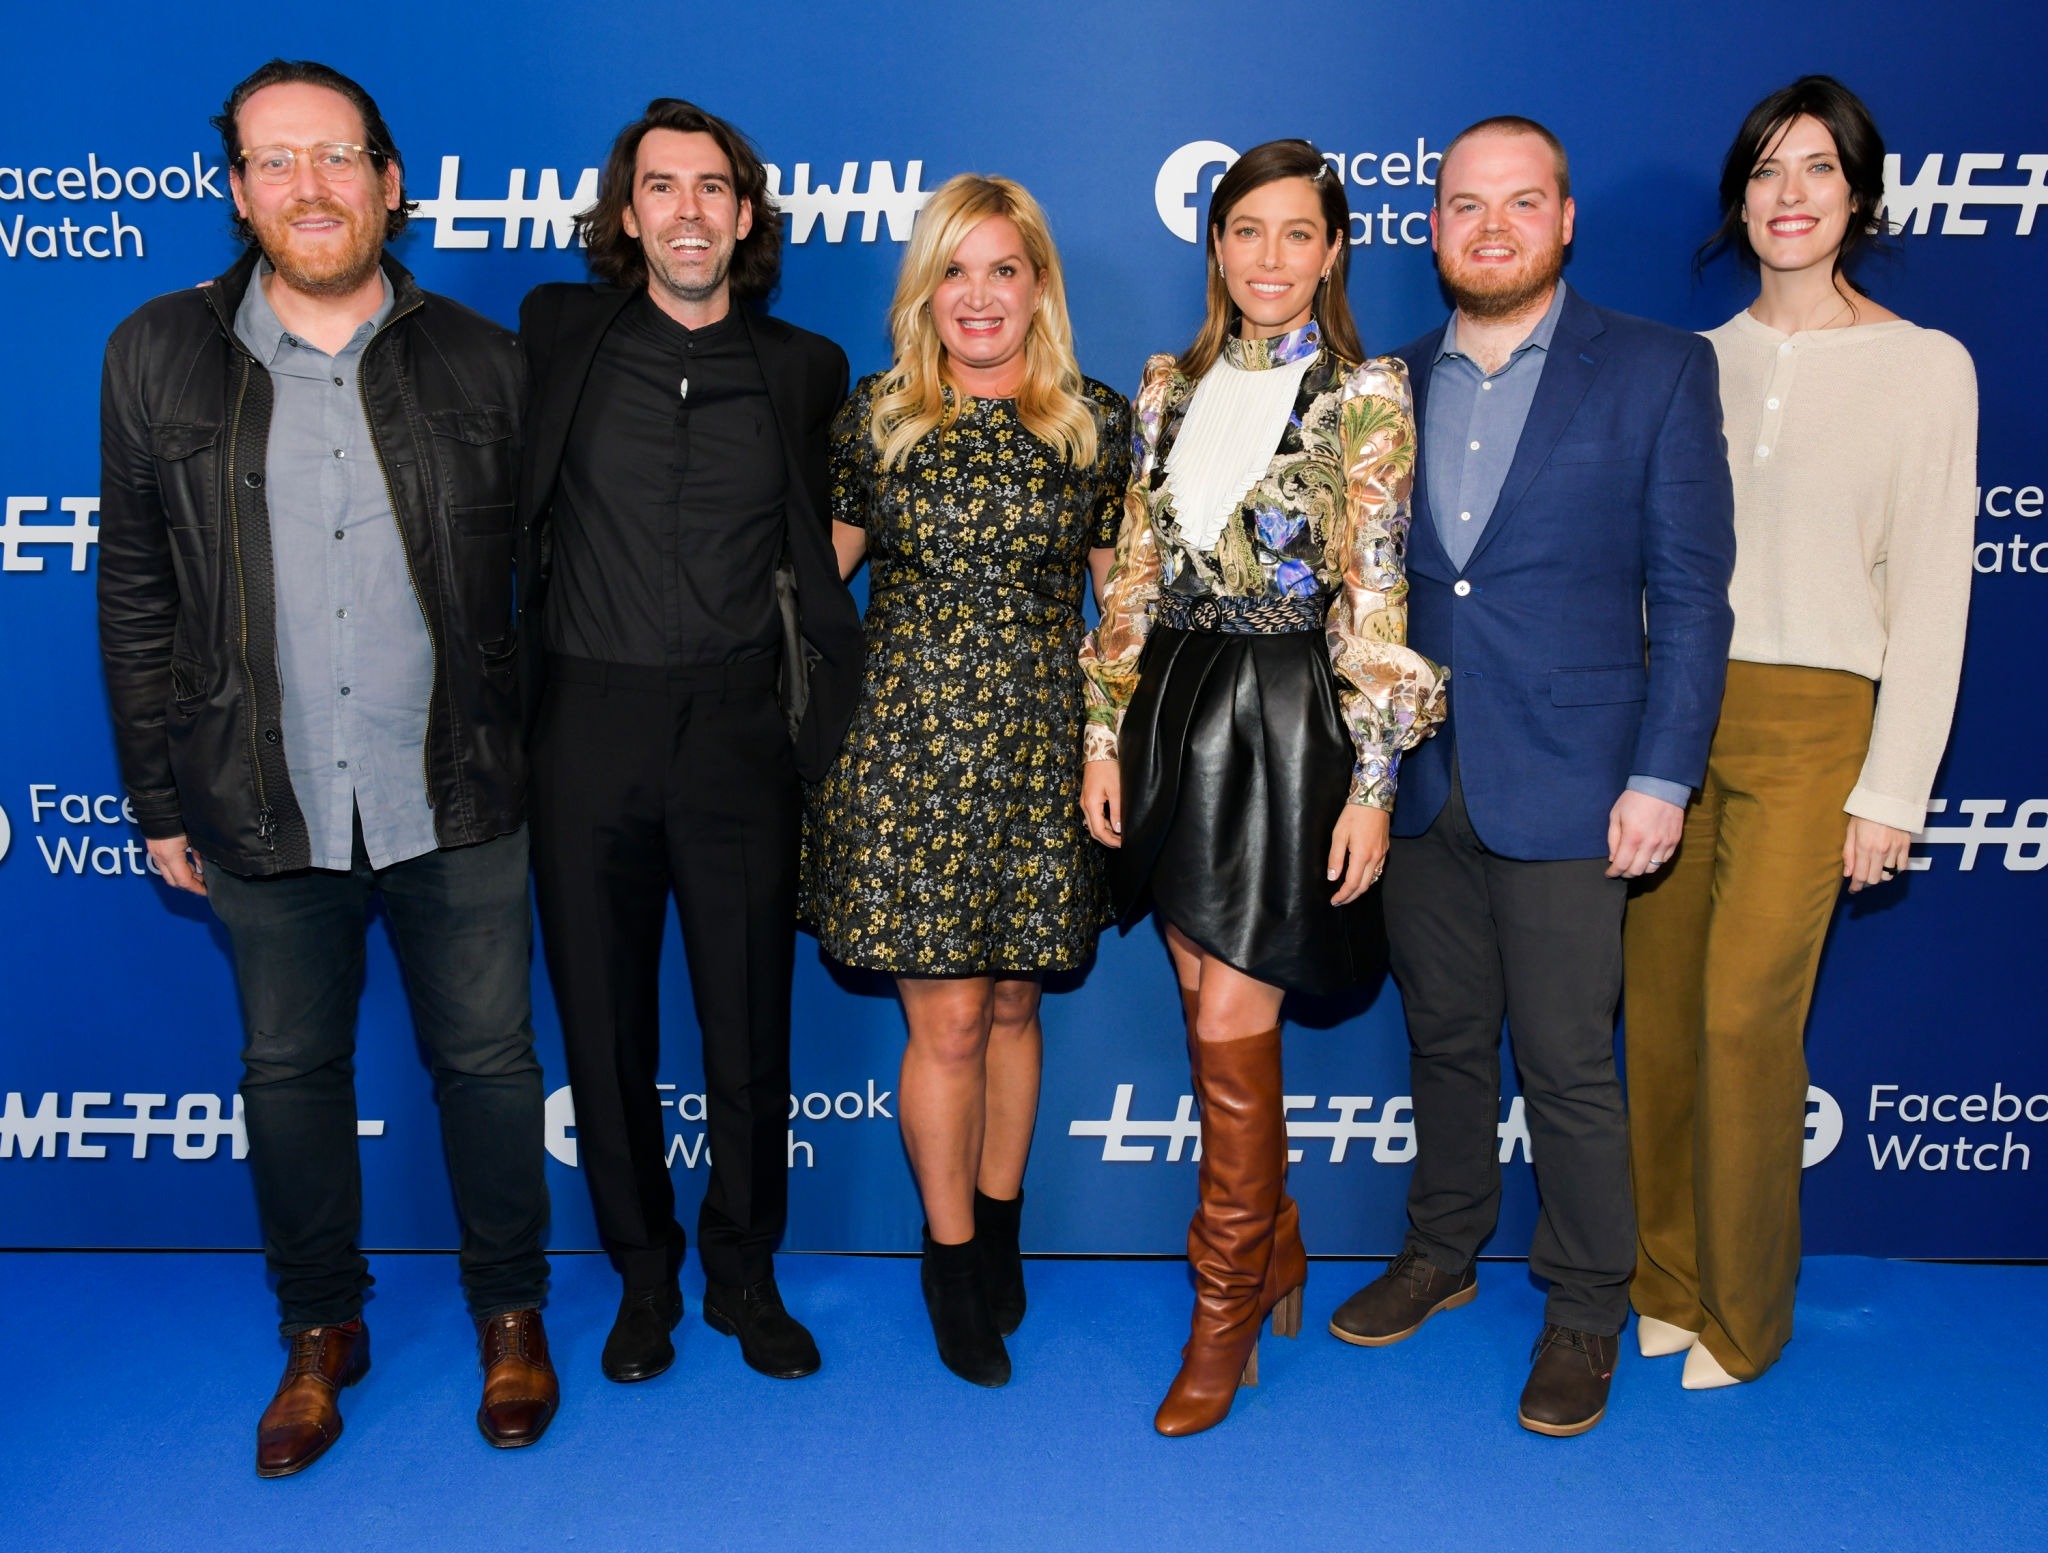 Jessica Biel attends Photocall for Facebook Watch’s ‘Limetown’